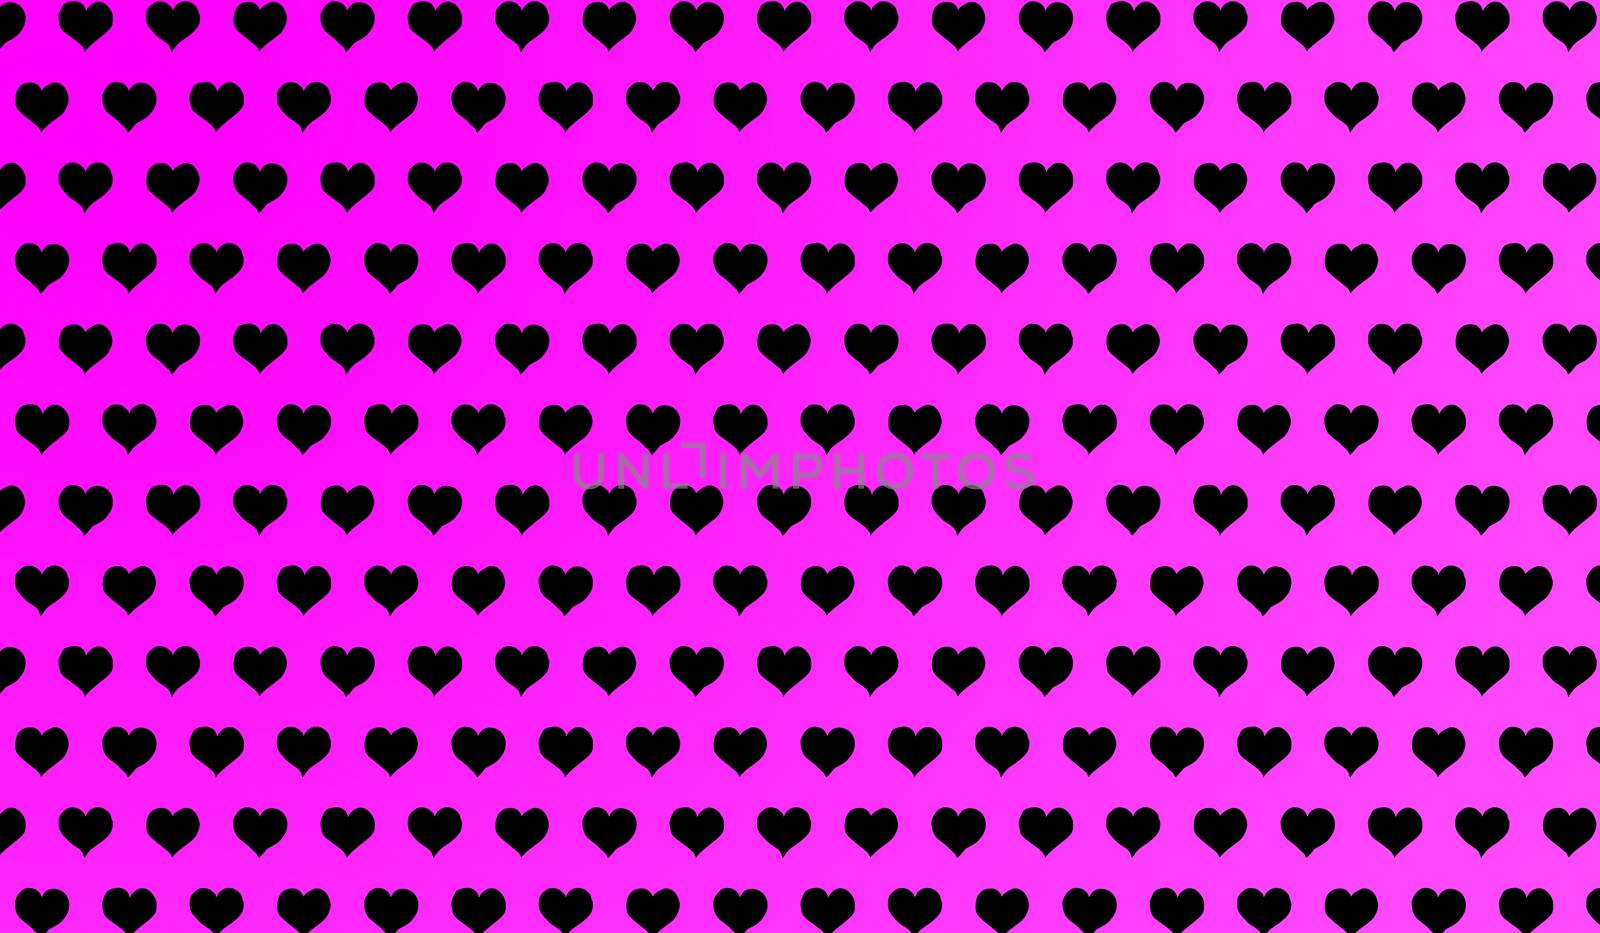 2d purple pattern of cartoon hearts on isolated background by Andreajk3